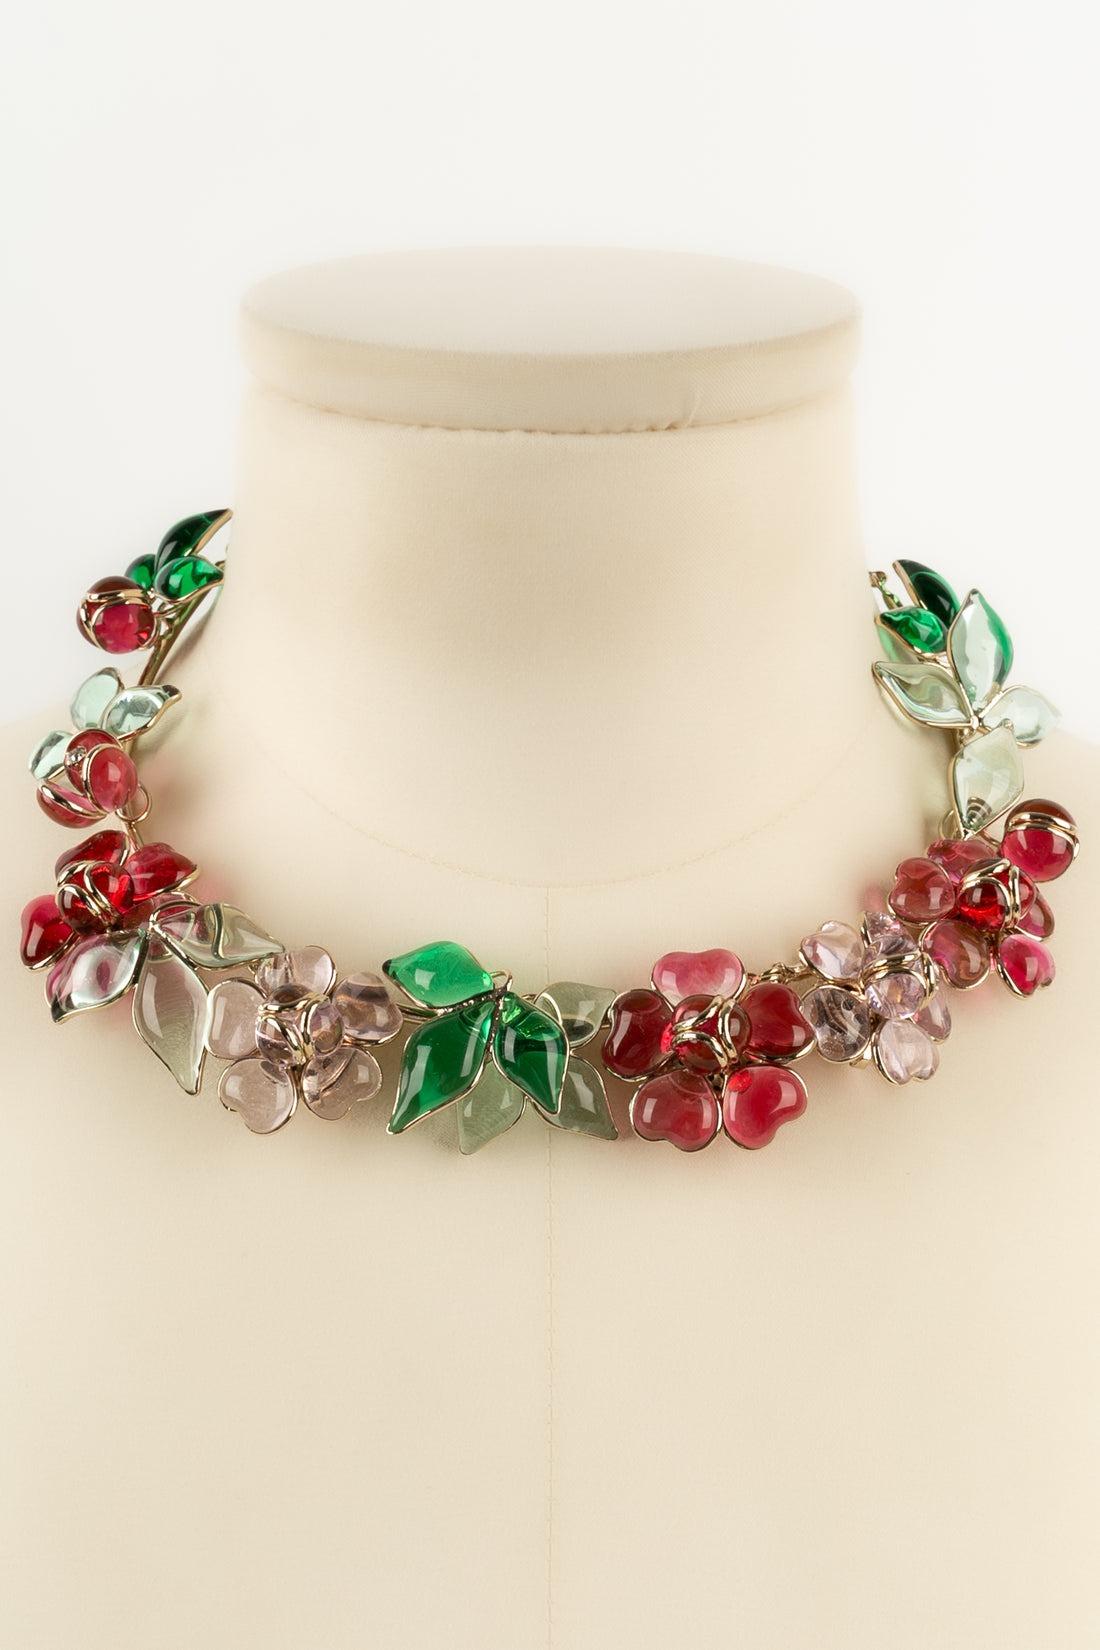 Augustine - (Made in France) Necklace in silver-plated metal and glass paste representing flowers in pink and green tones.

Additional information:
Condition: Very good condition
Dimensions: Length: from 38.5 cm to 44.5 cm

Seller Reference: BC27